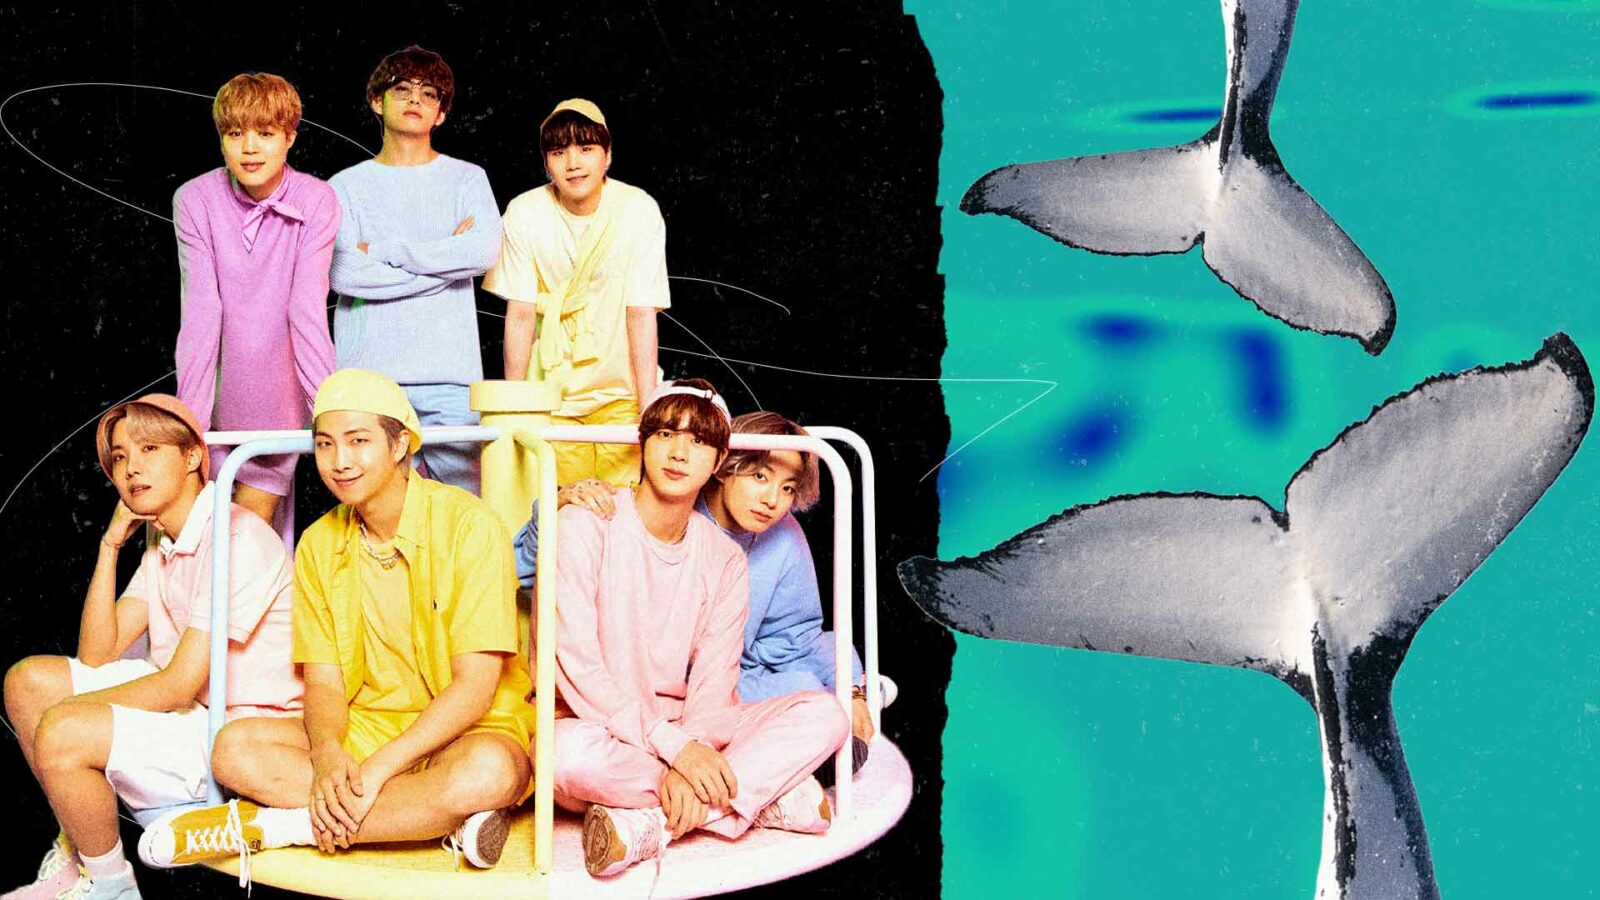 PINOY ARMYS ADOPTED 8 WHALES IN HONOR OF BTS’S 8TH ANNIVERSARY